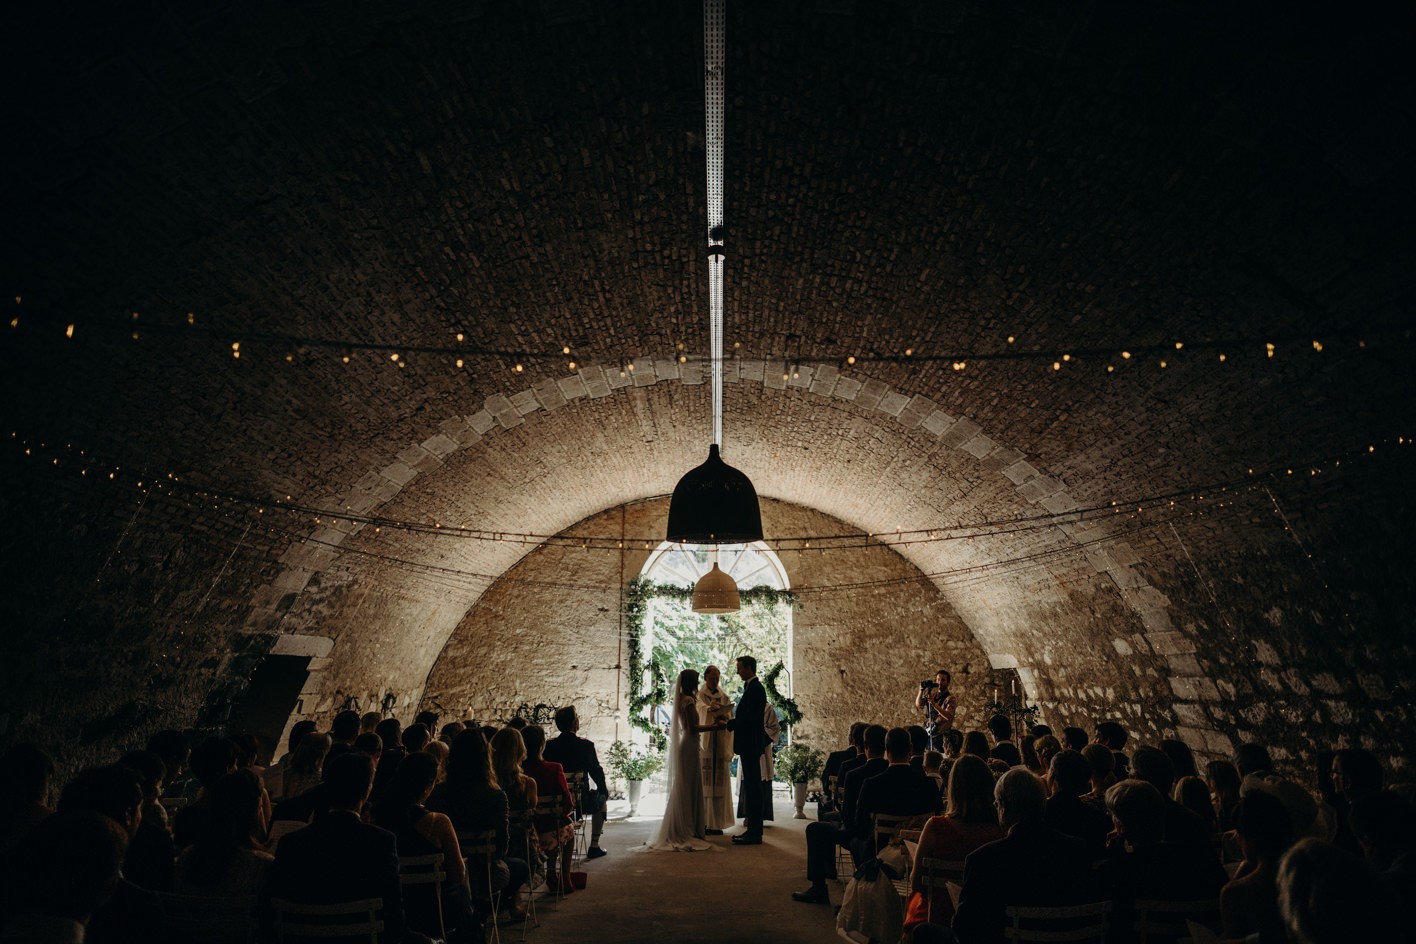 Cellar wedding ceremony with bride and groom facing each other